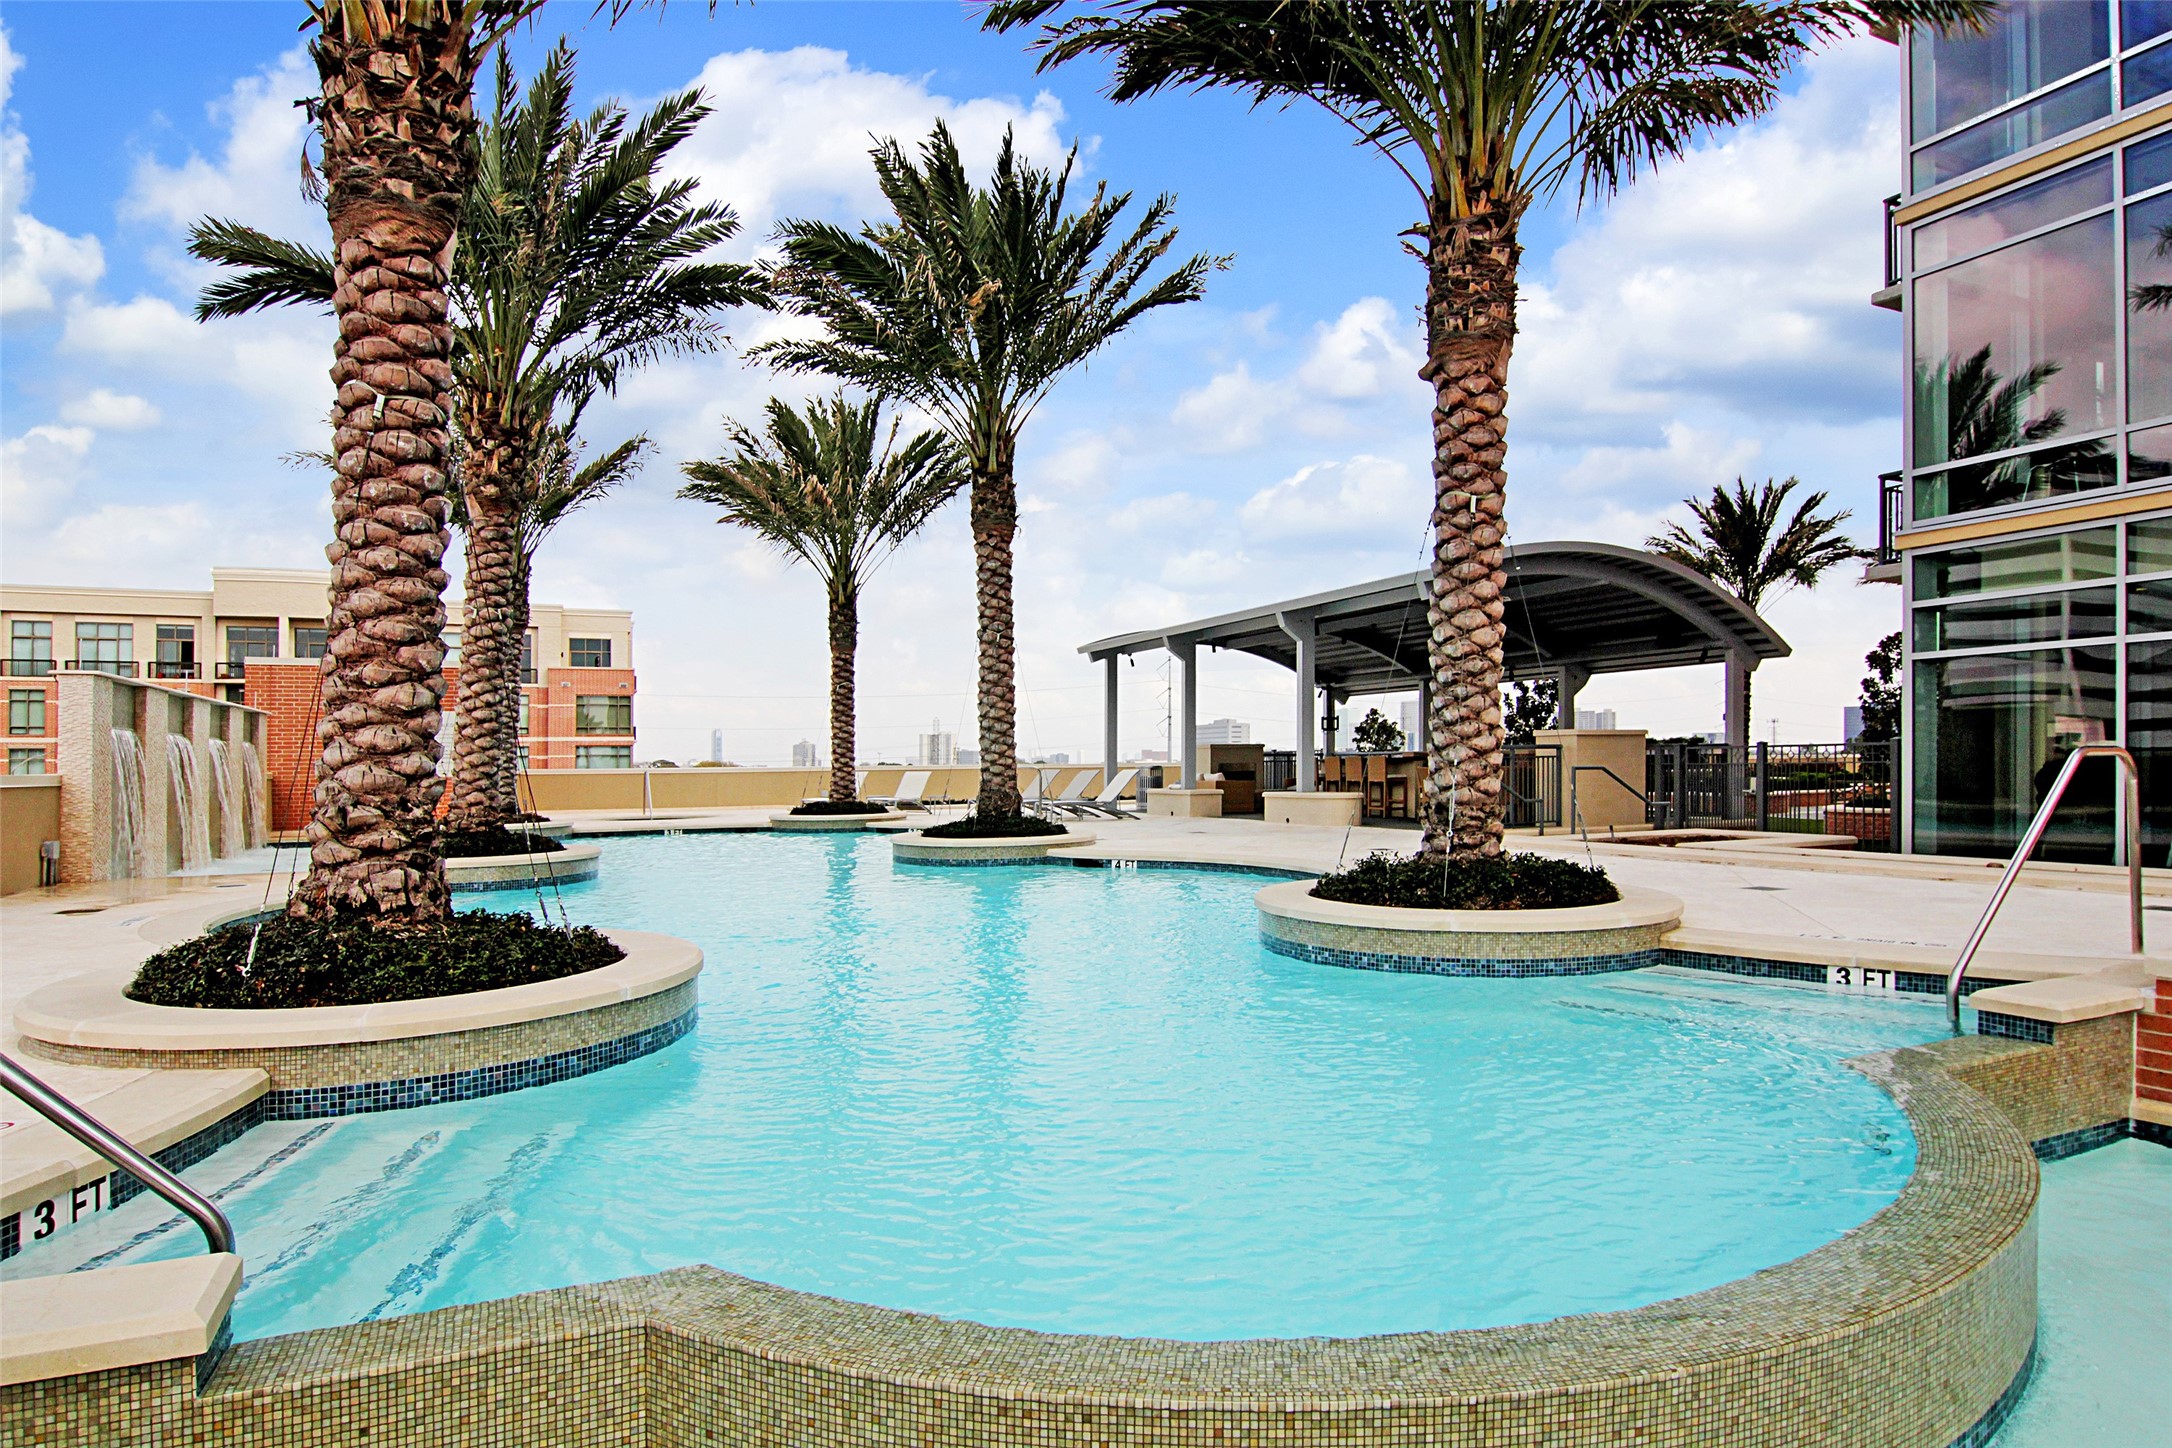 Highland Tower's pool was voted best Hi-Rise pool when it first opened.   Palms suffered damage during Houston's ice storm and did not survive.  Palms have been removed and replacement will be expected this Fall.